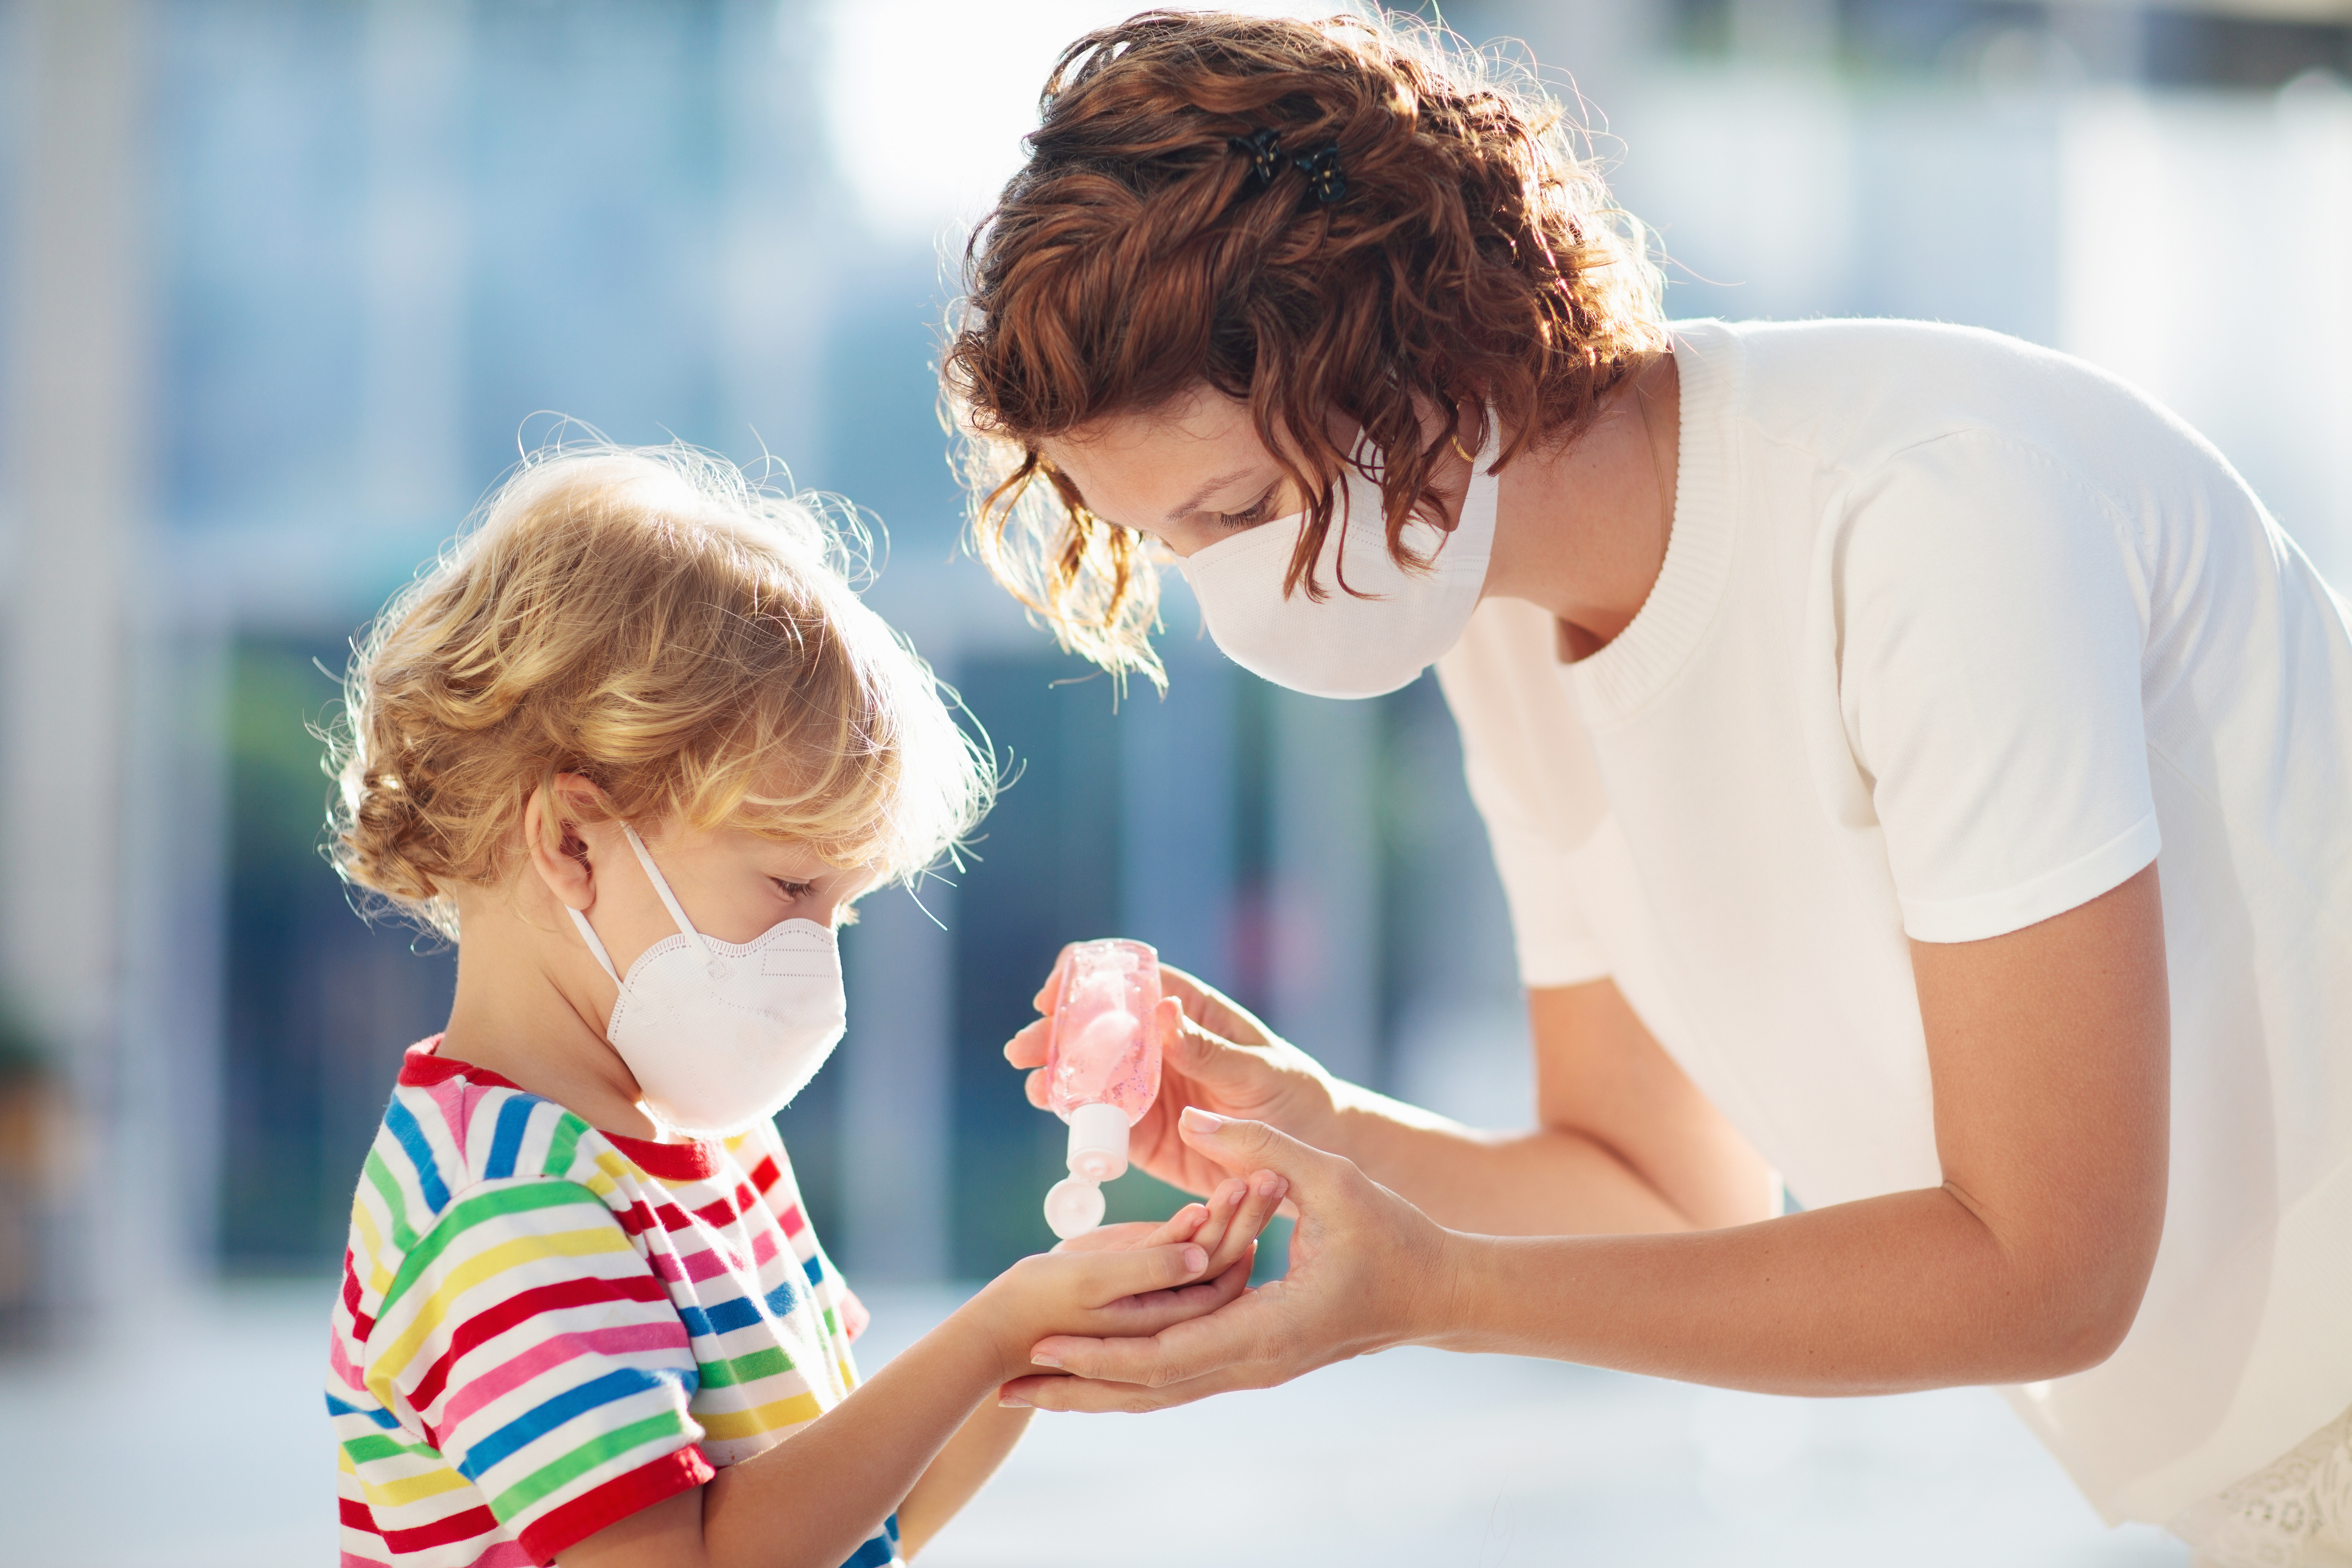 How Healthcare Workers with Children Are Coping During the Pandemic